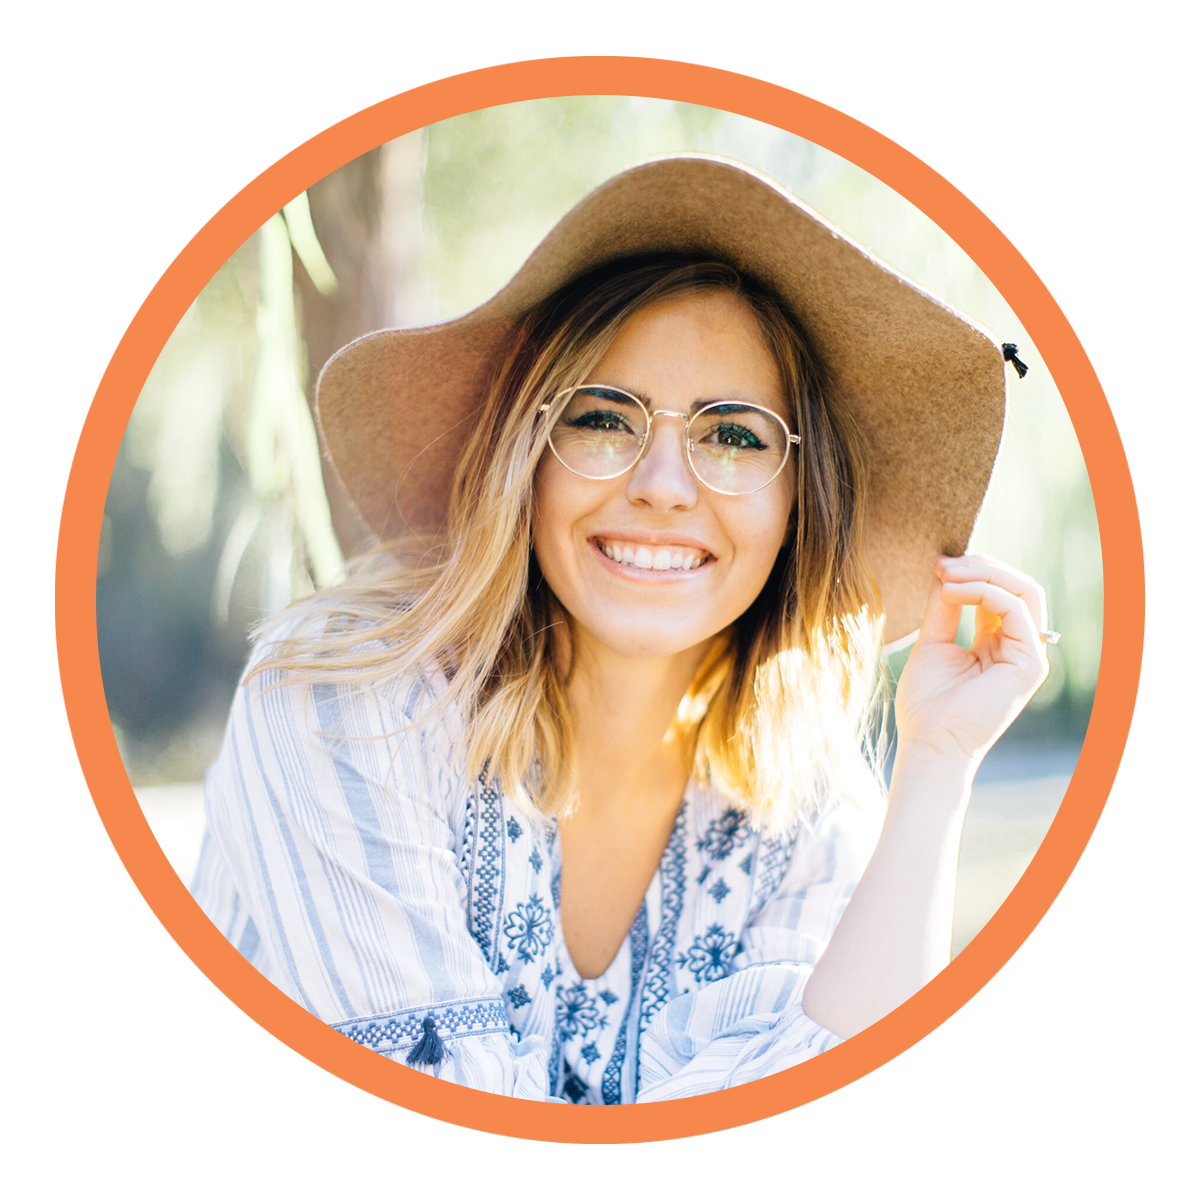  Josie is the founder of Merrilly Giving Co., a website that aims to inspire and facilitate giving in the wedding and event industry by connecting socially conscious clients and vendors to create more meaningful events. After living briefly in Washin